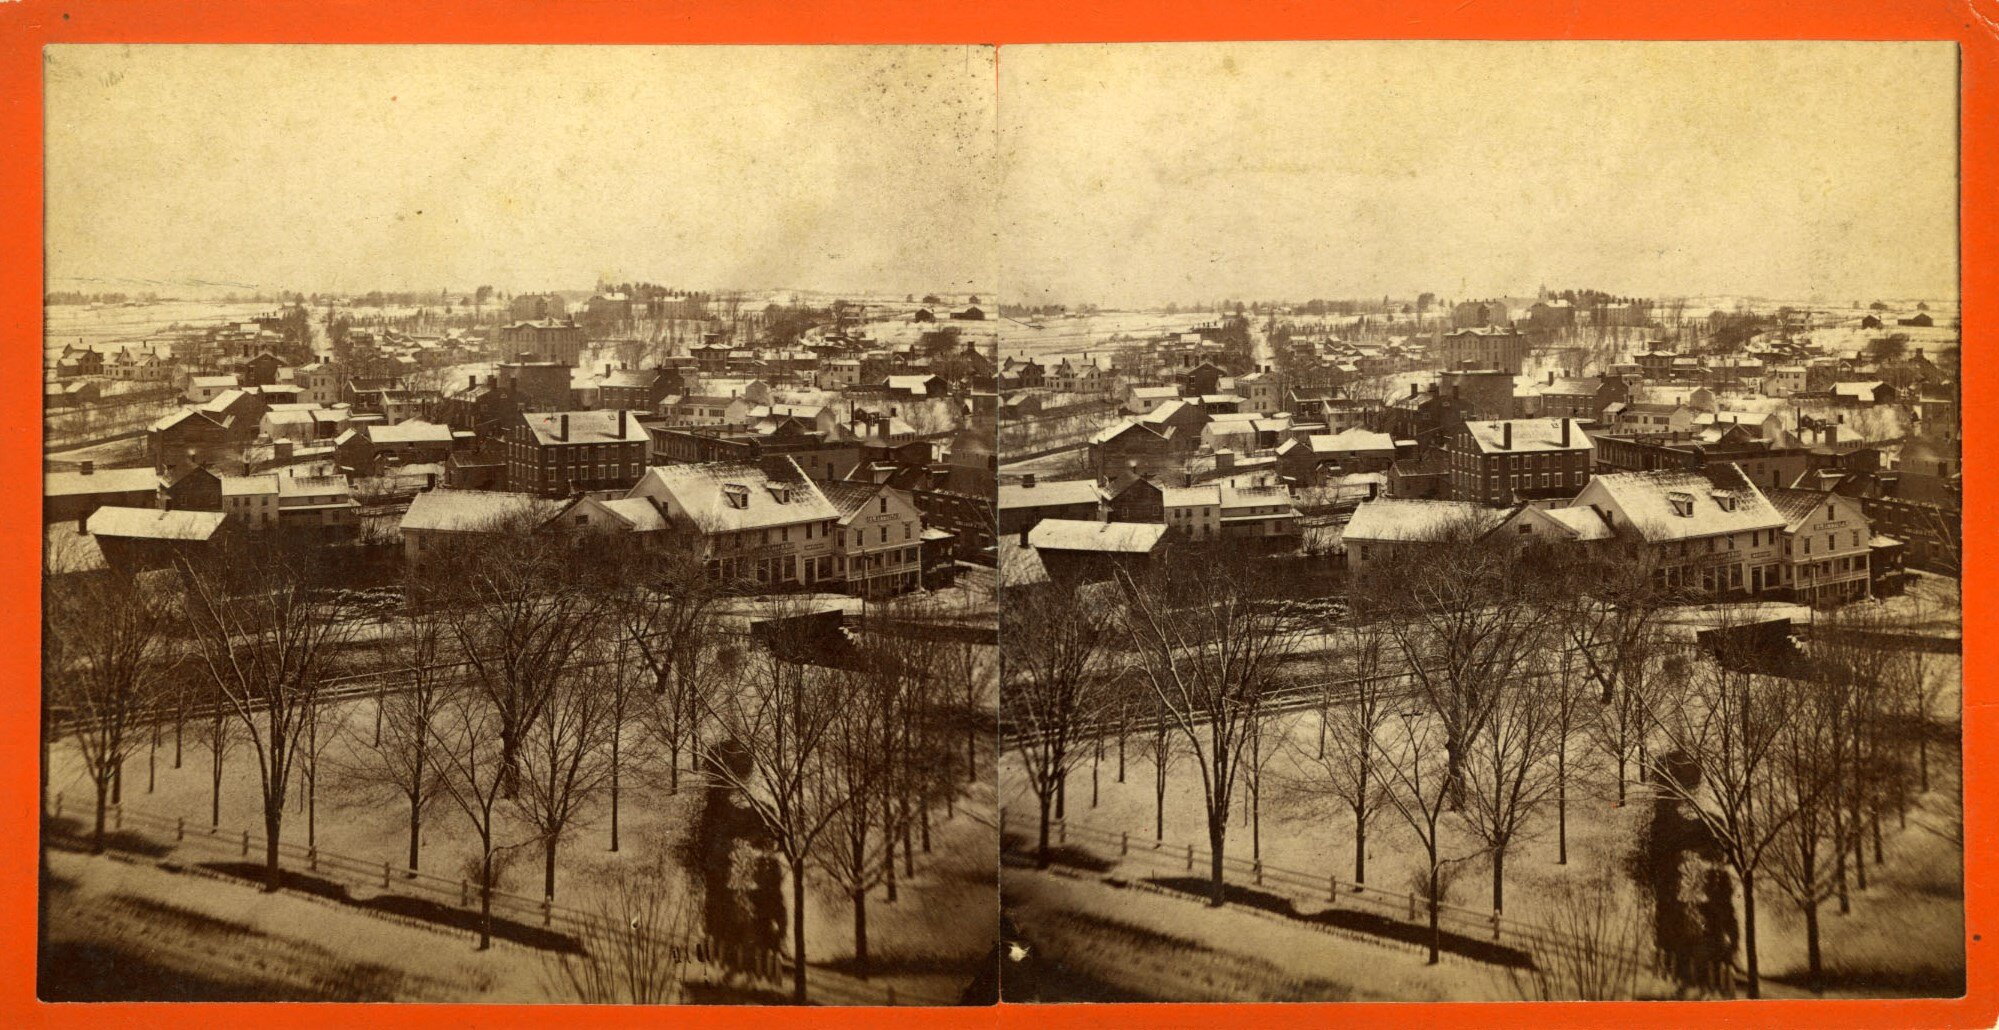 Town of Middlebury from Addison House by photographer O.C. Barnes